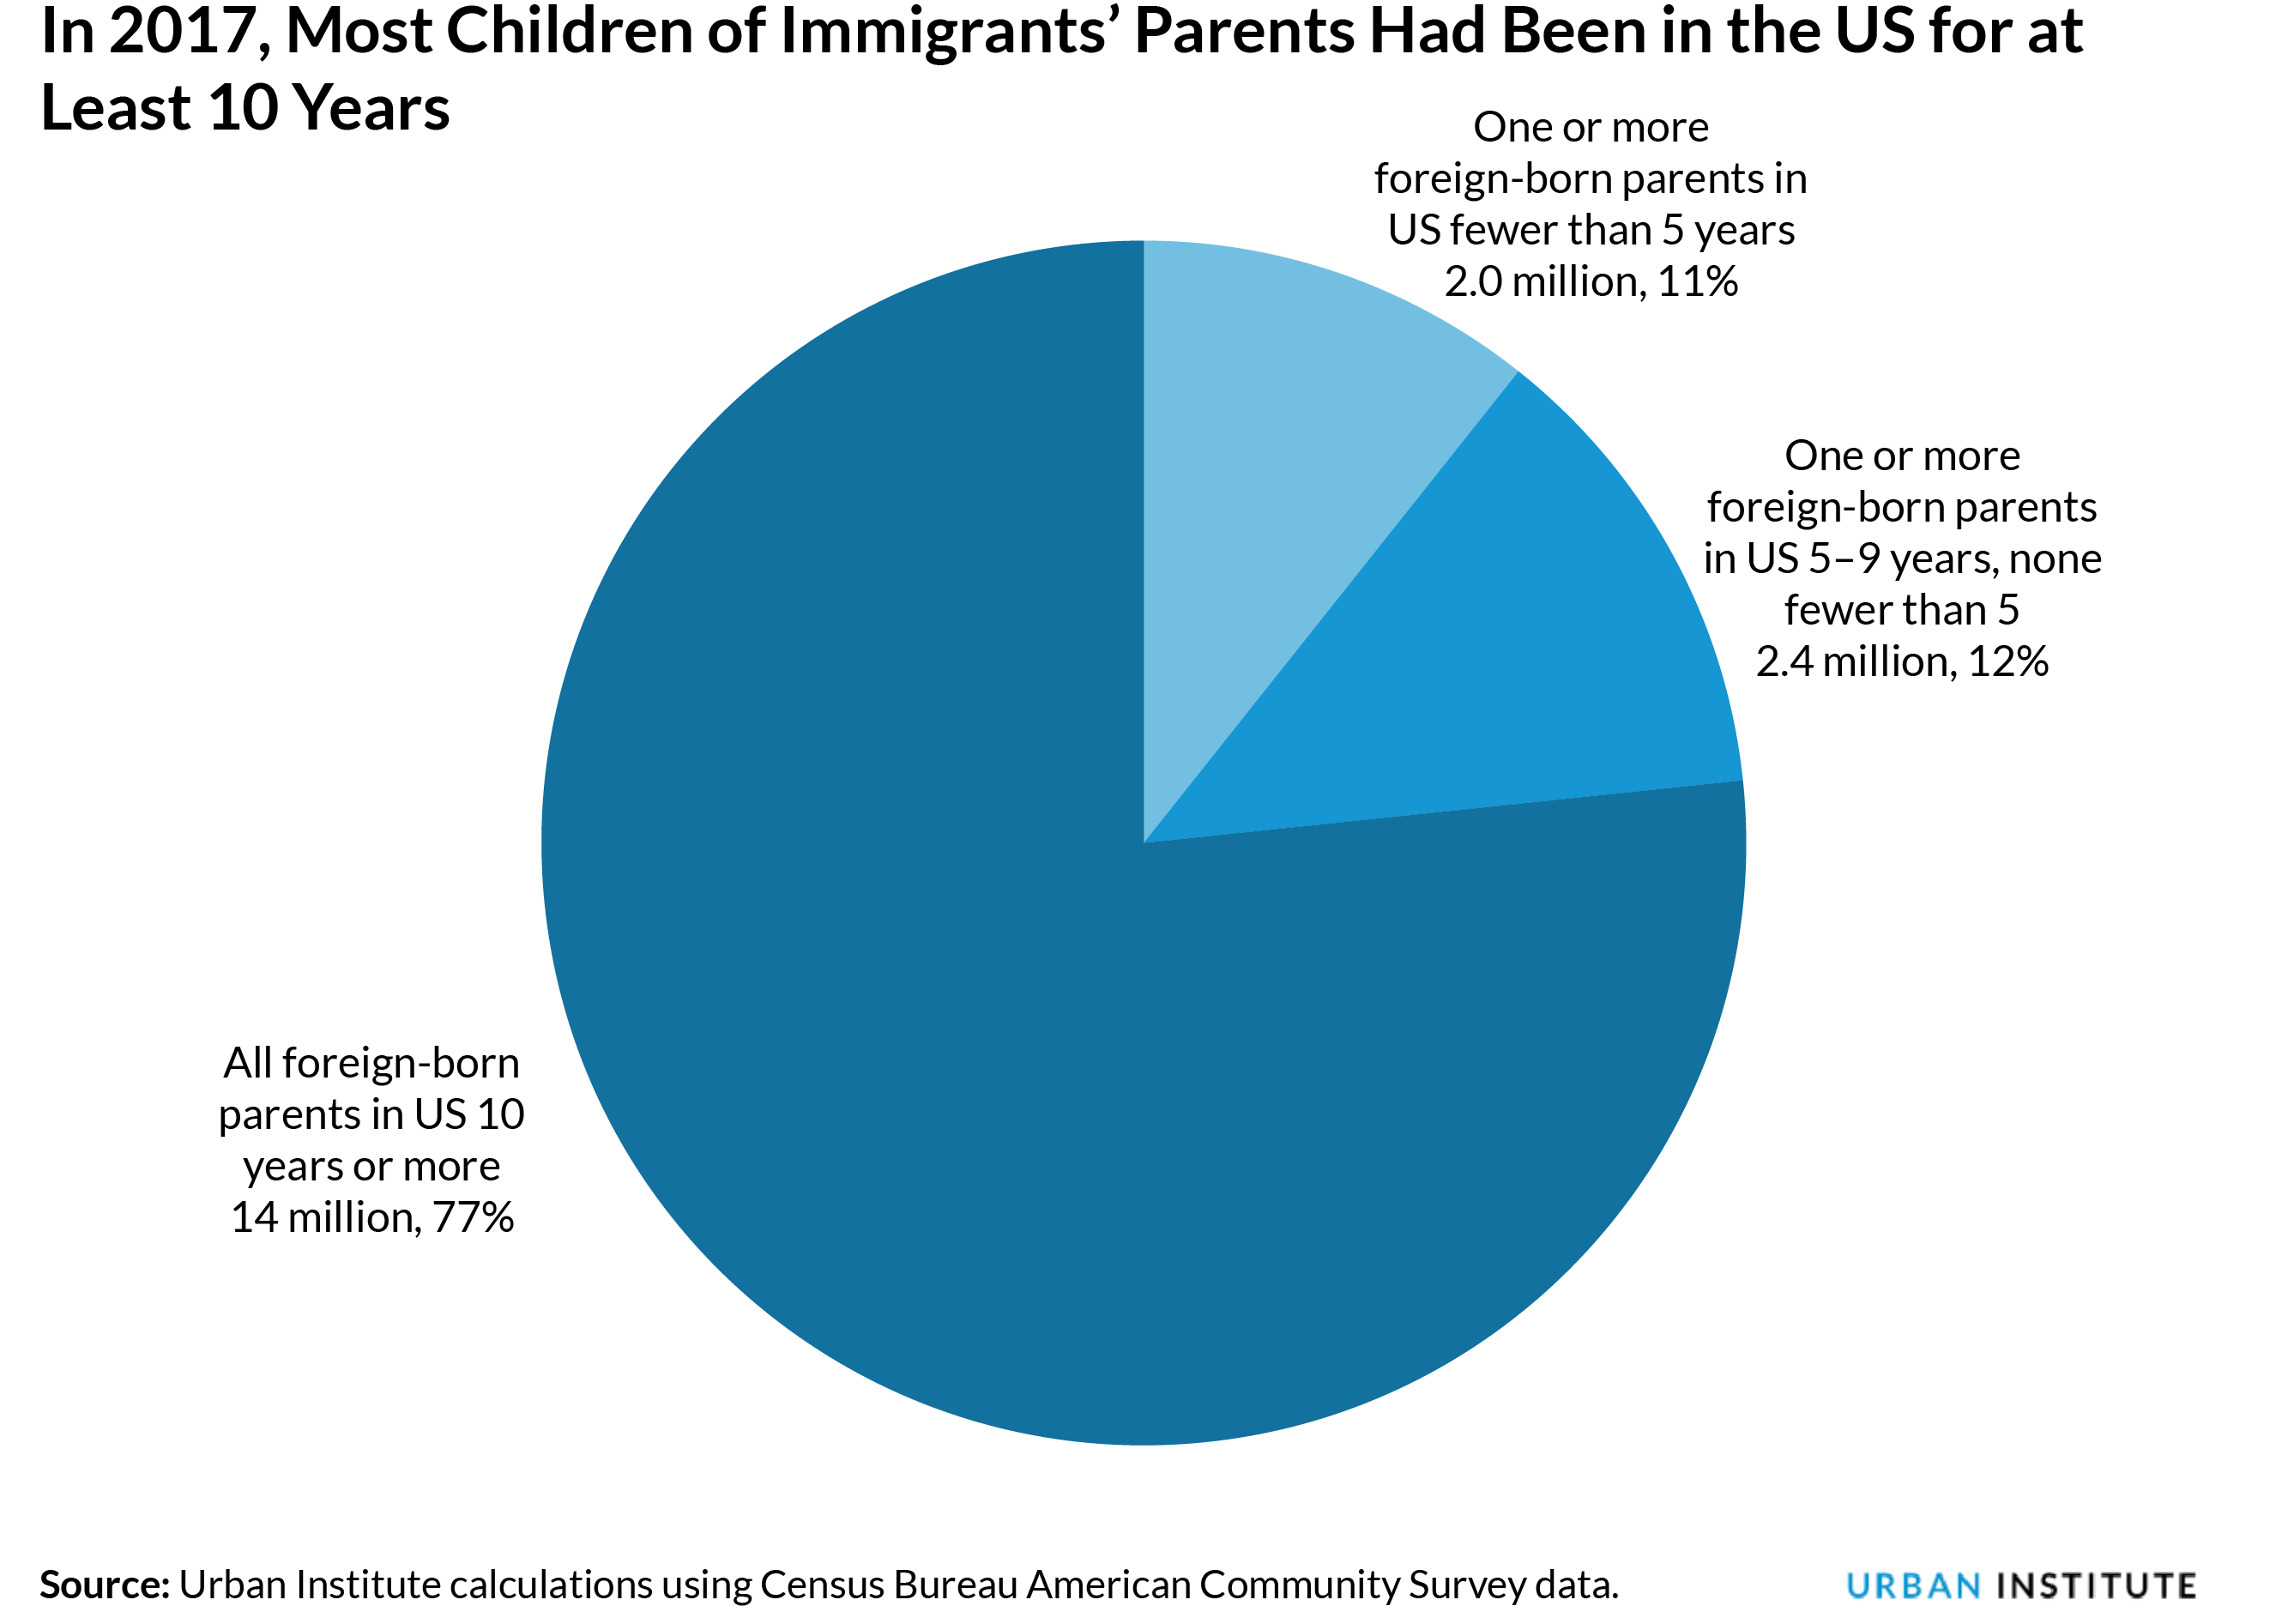 In 2017, Most Children of Immigrants' Parents Had Been in the US for at Least 10 Years